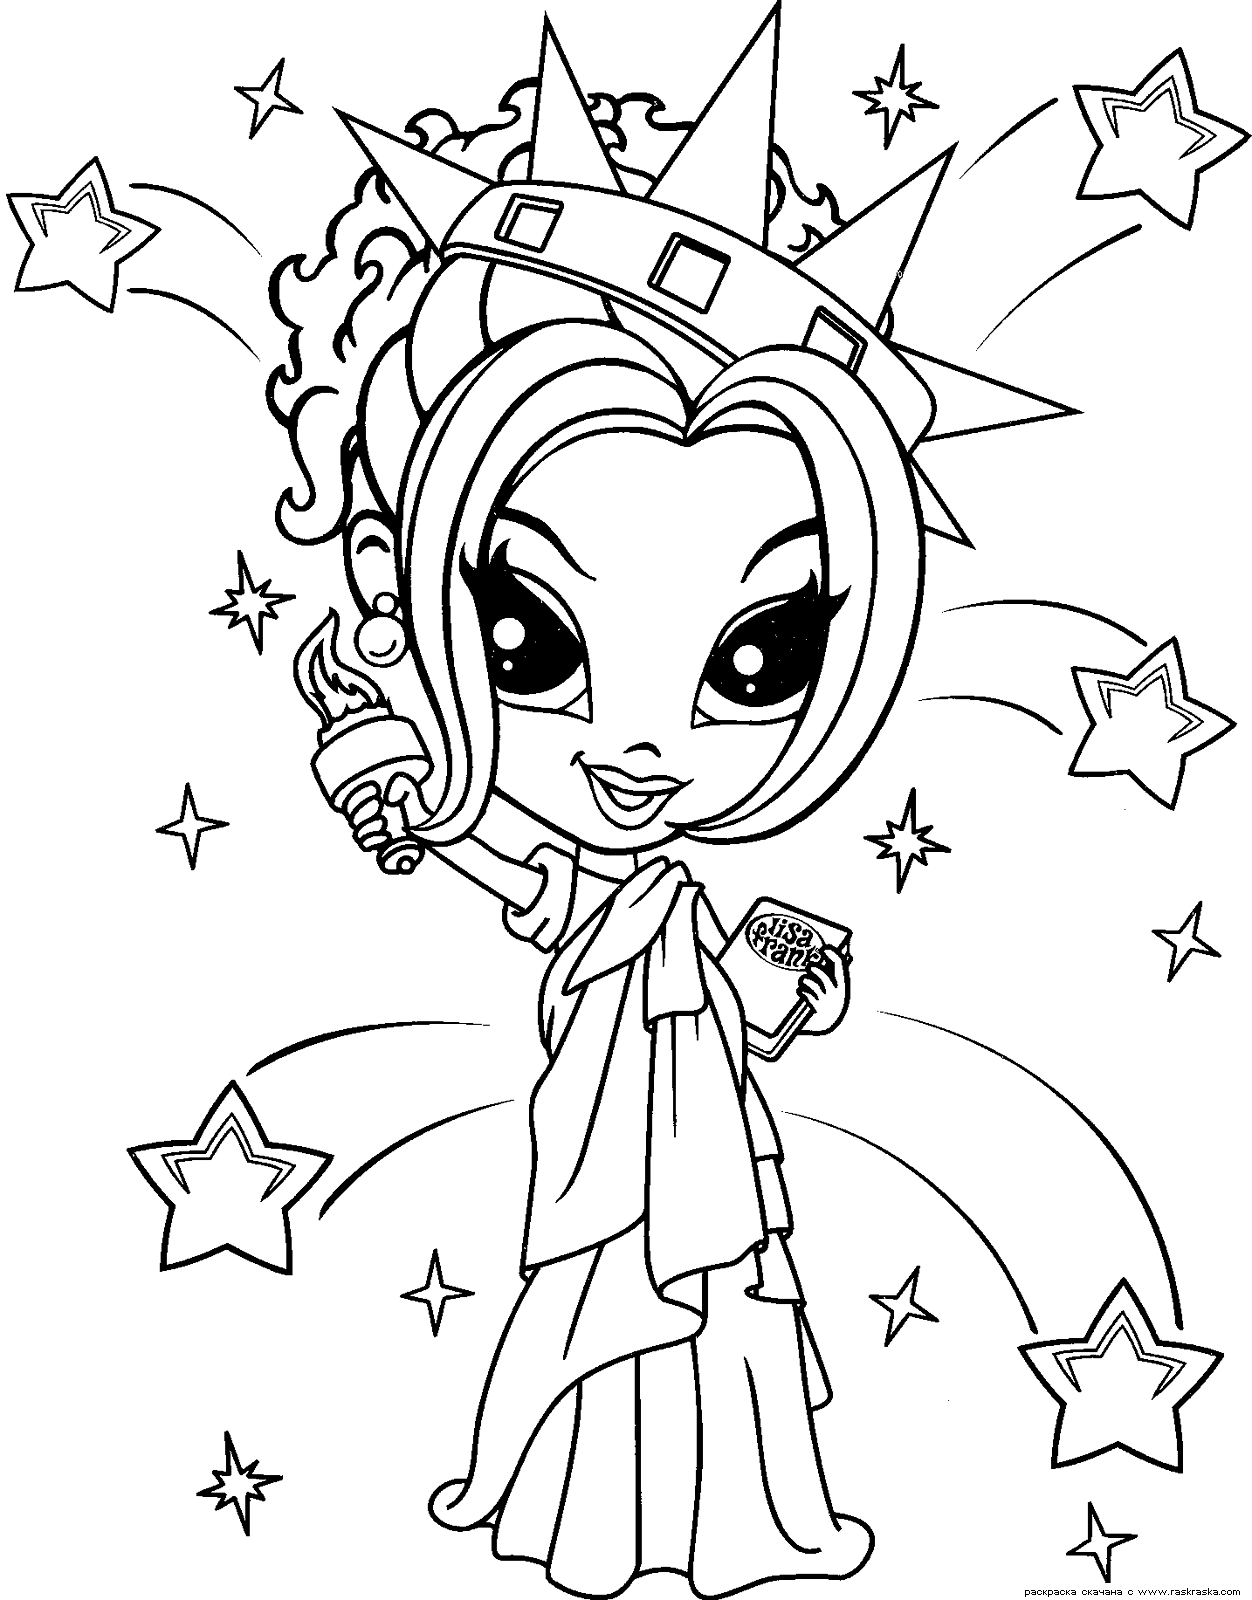 9 Pics Of Lisa Frank Girl Coloring Pages Ice Cream - Lisa ...